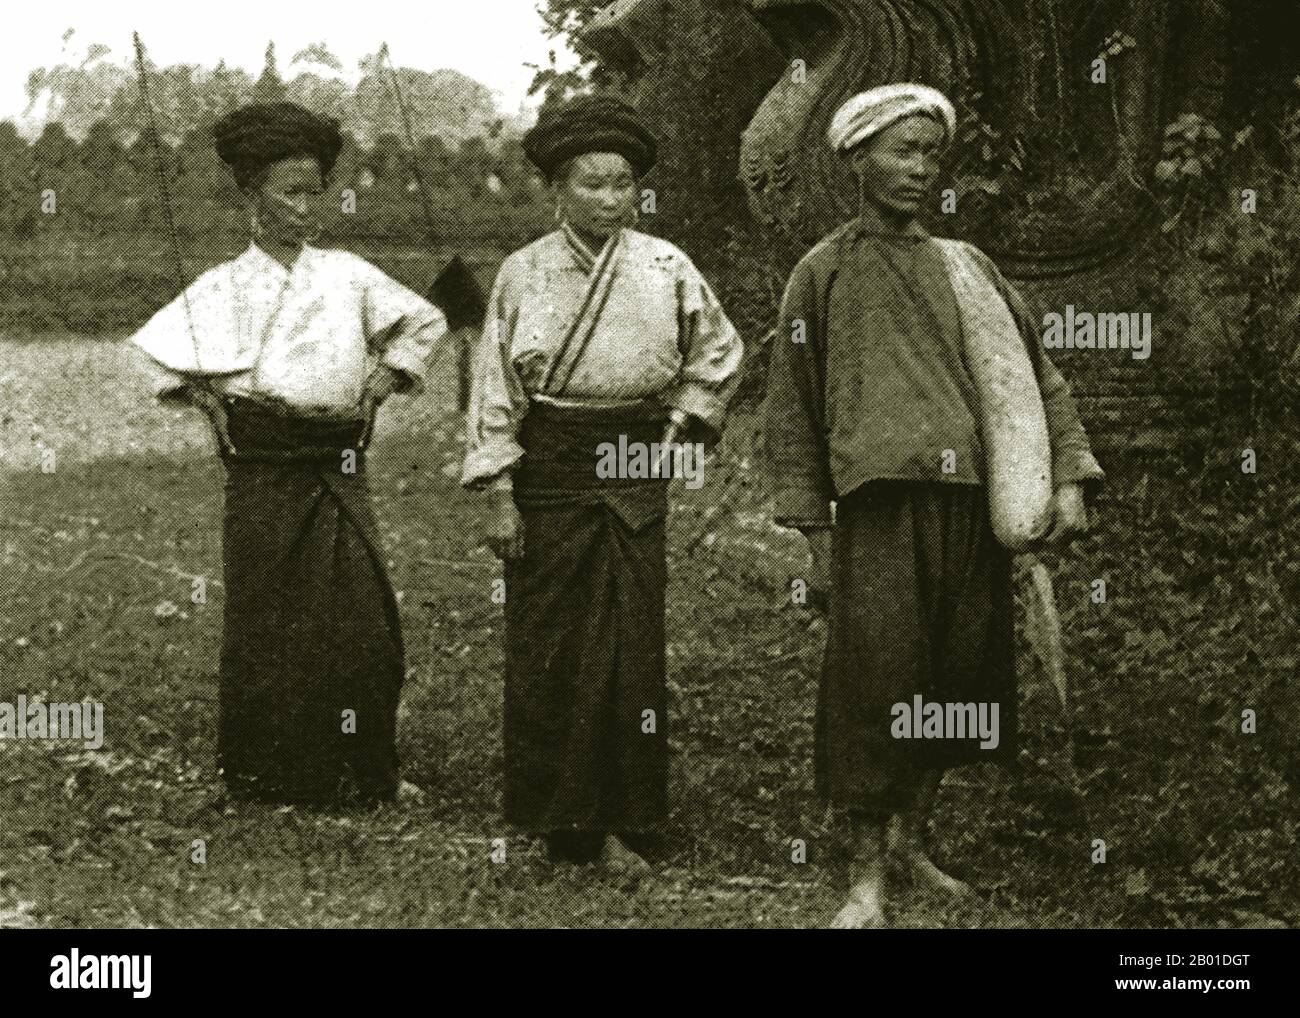 Located in the northeast of the country, Shan State covers one-quarter of Burma’s land mass. It was traditionally separated into principalities and is mostly comprised of ethnic Shan, Burman Pa-O, Intha, Taungyo, Danu, Palaung and Kachin peoples. Stock Photo